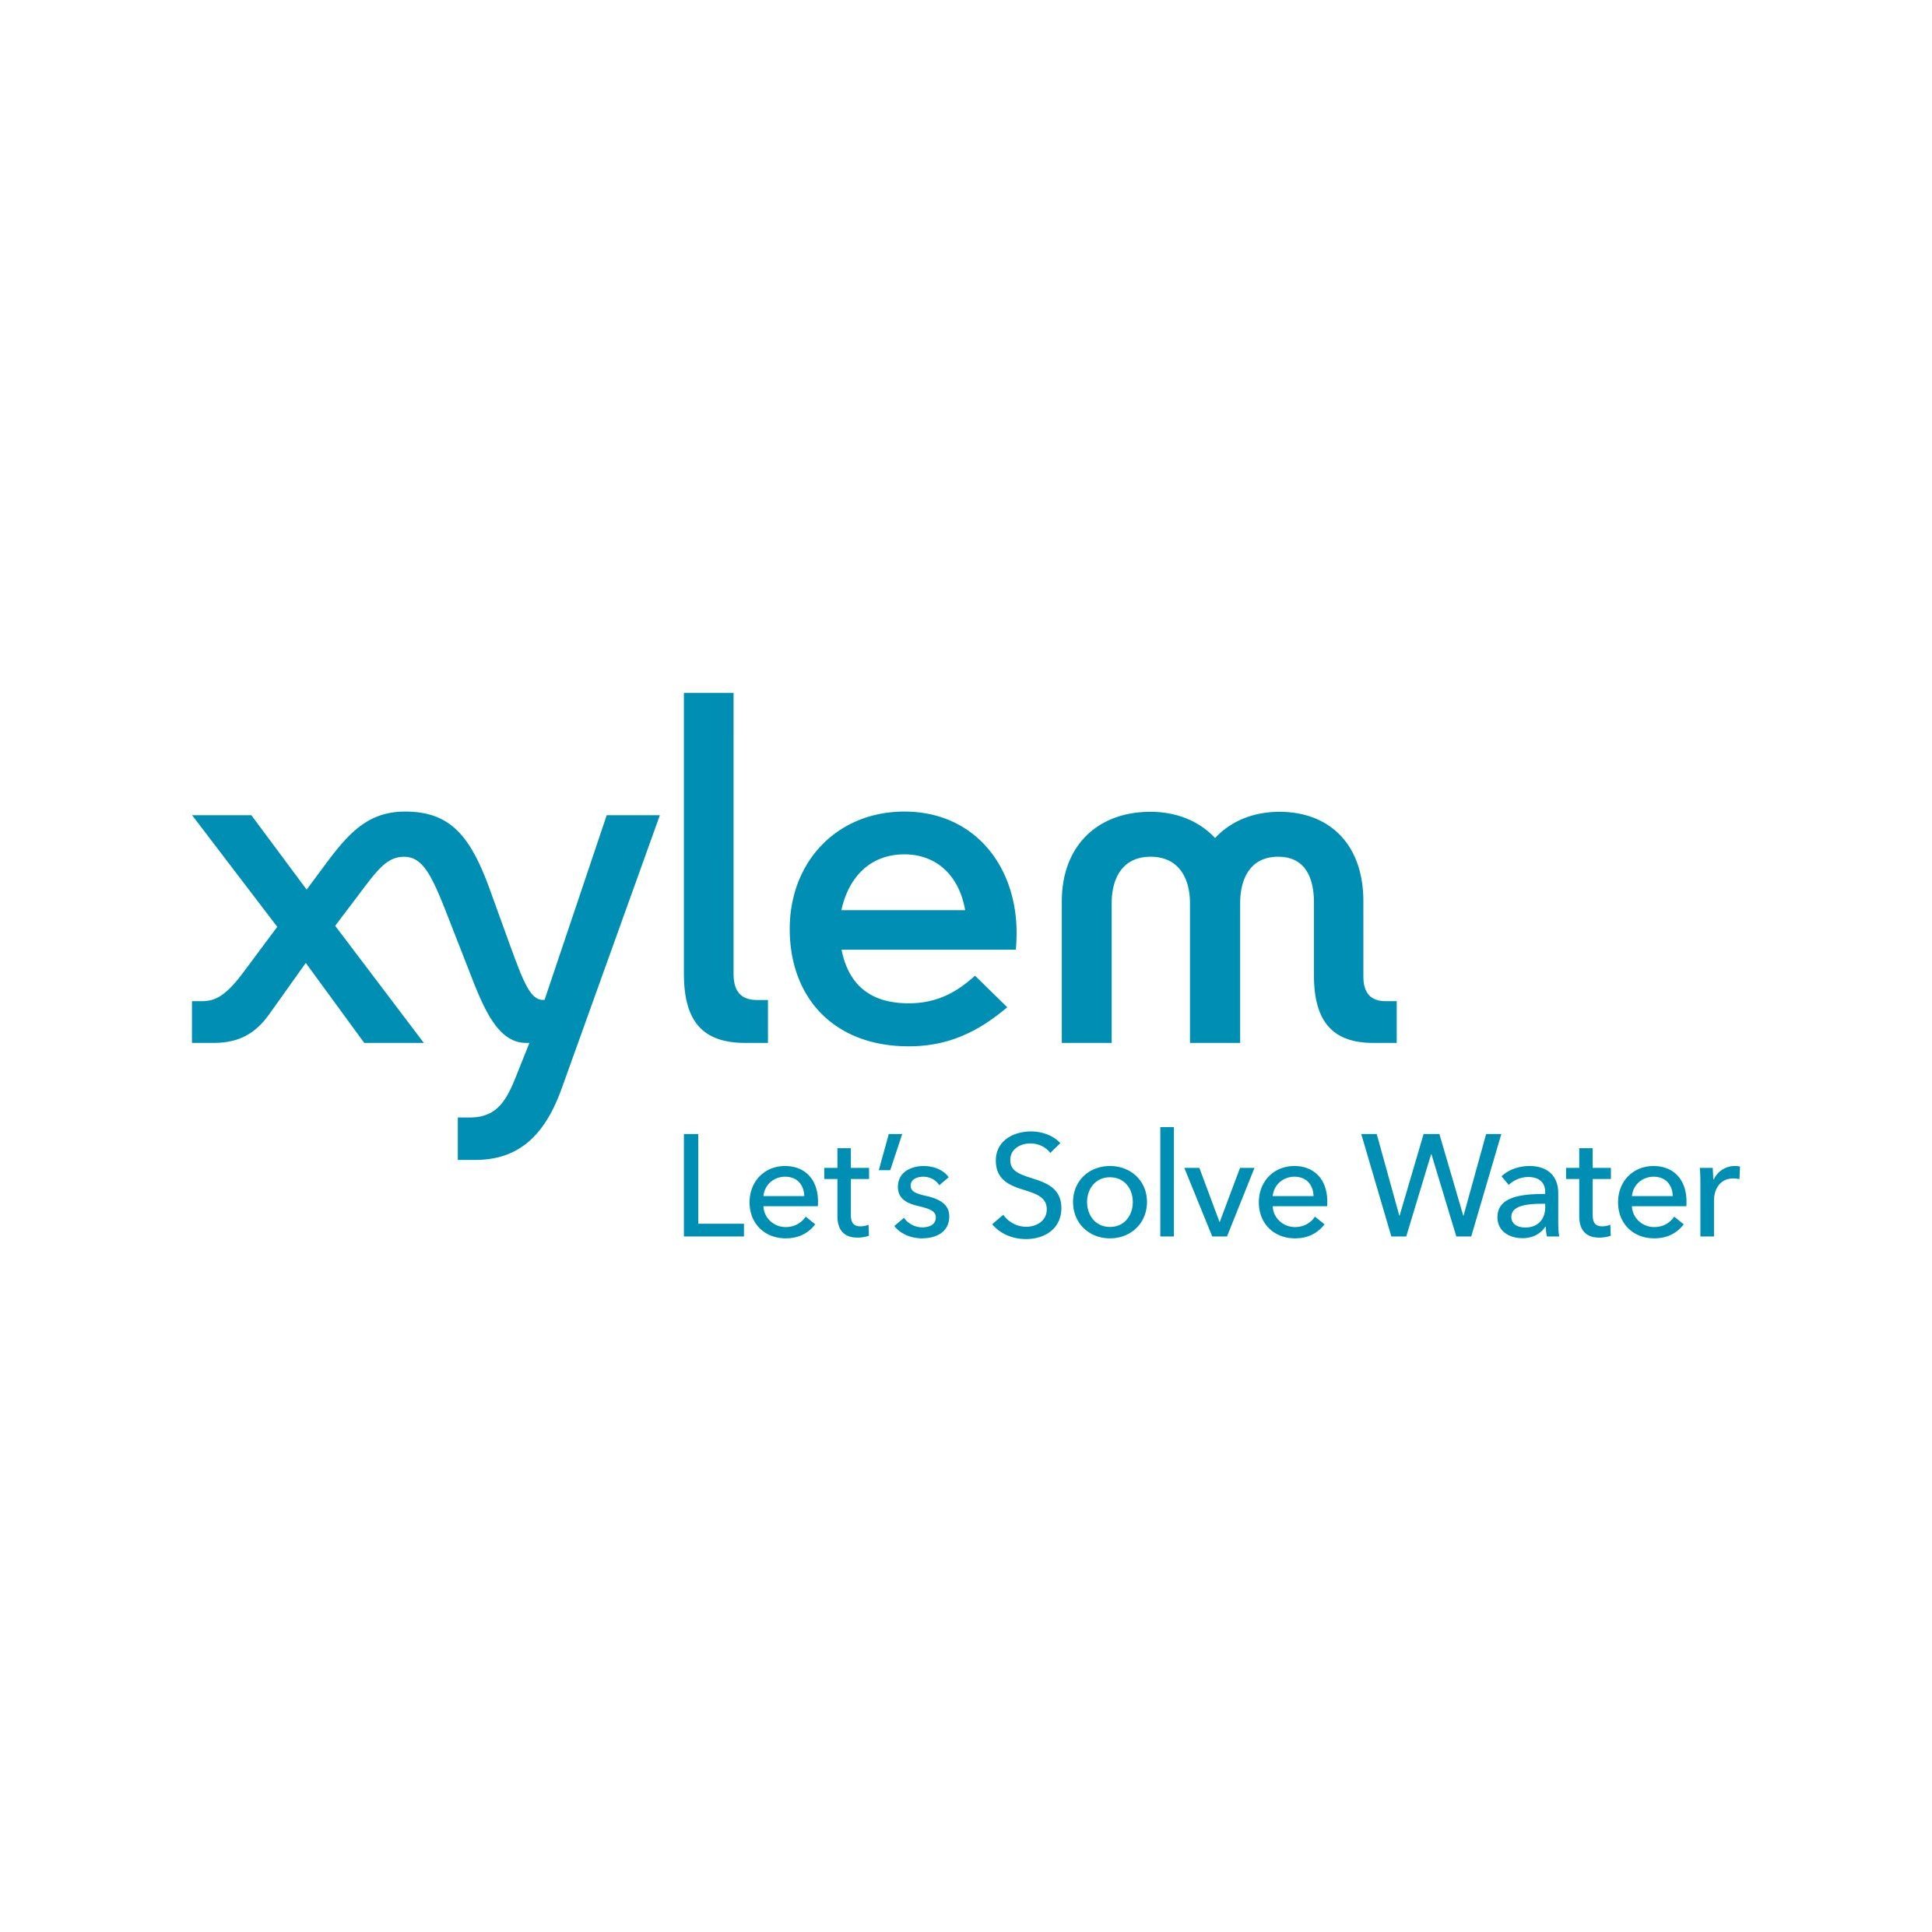 A leading water technology company committed to 